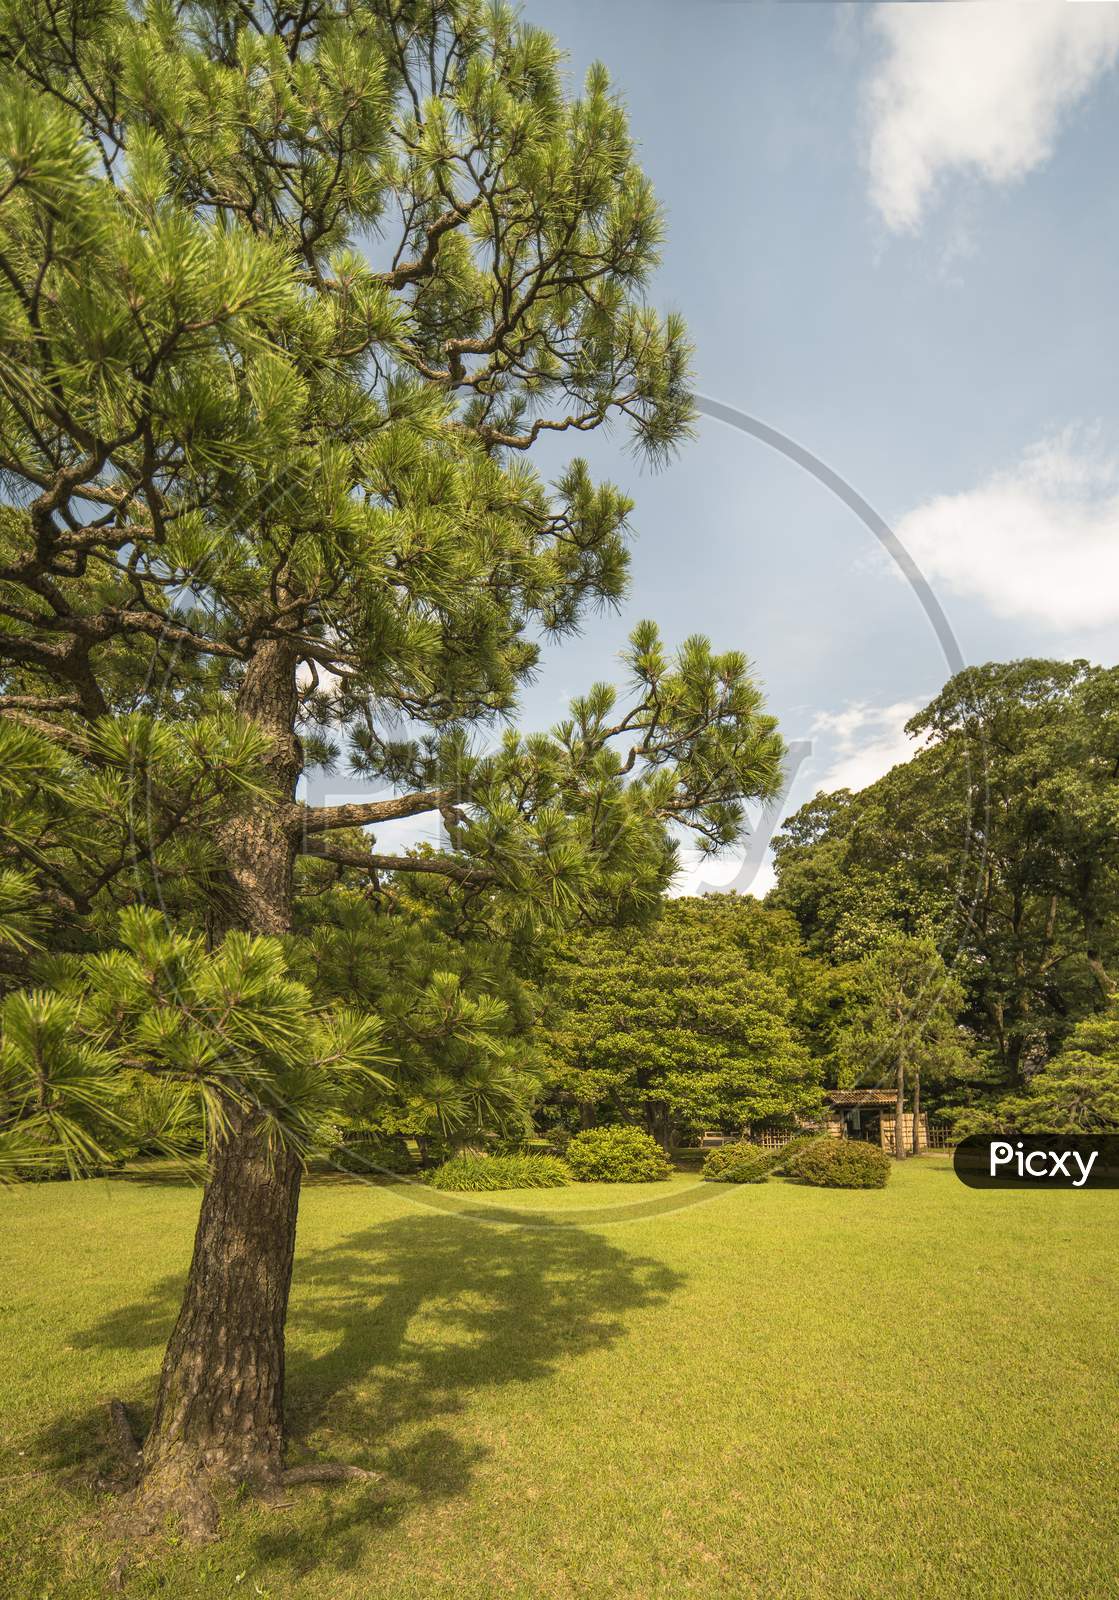 Big Pine Tree On A Lawn Under The Blue Sky And Bamboo Gate In The Garden Of Rikugien In Tokyo In Japan.